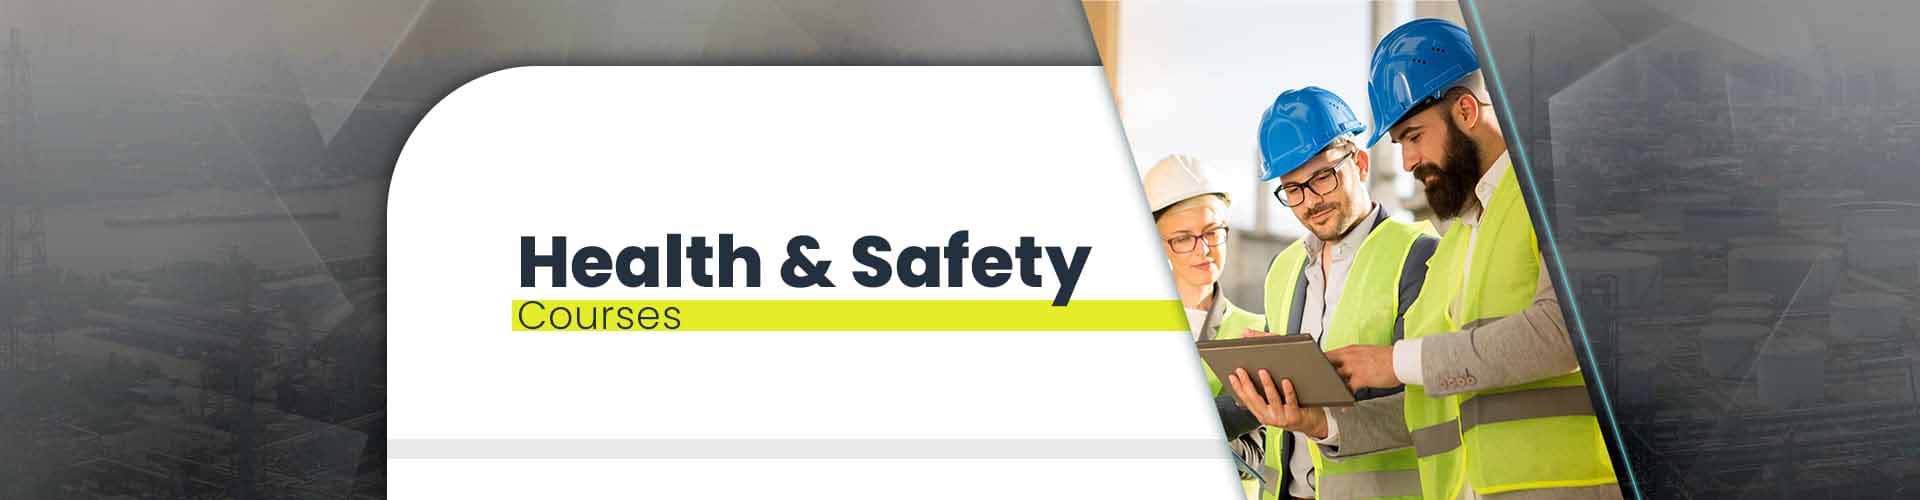 Health_Safety_Courses